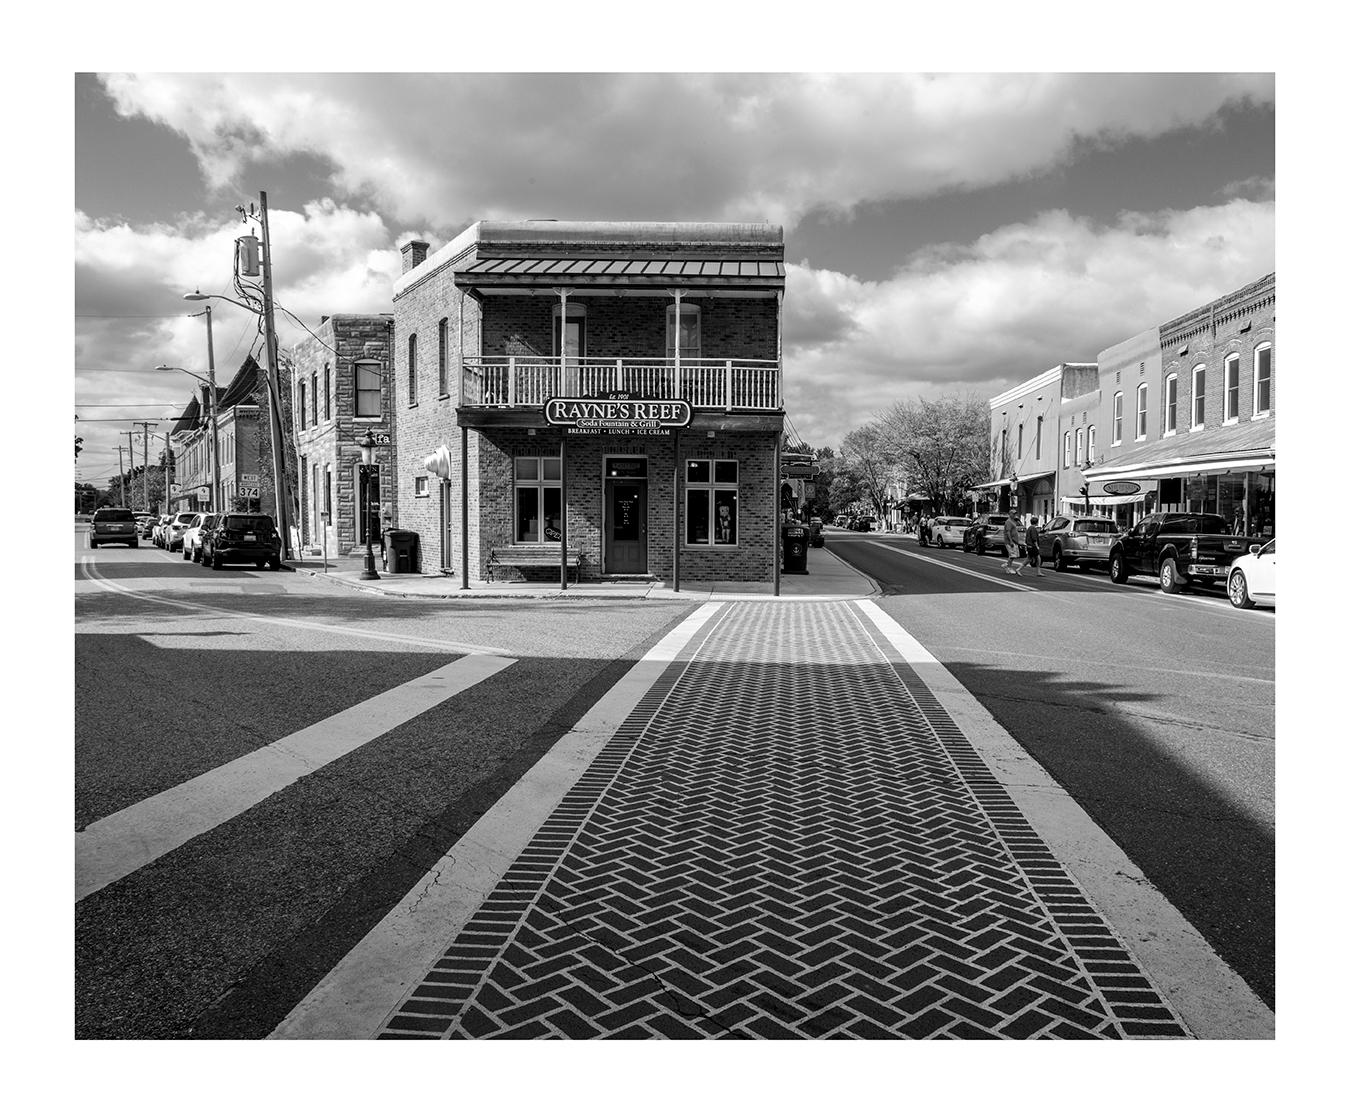 Downtown Berlin, Maryland, America's "Coolest" Small Town